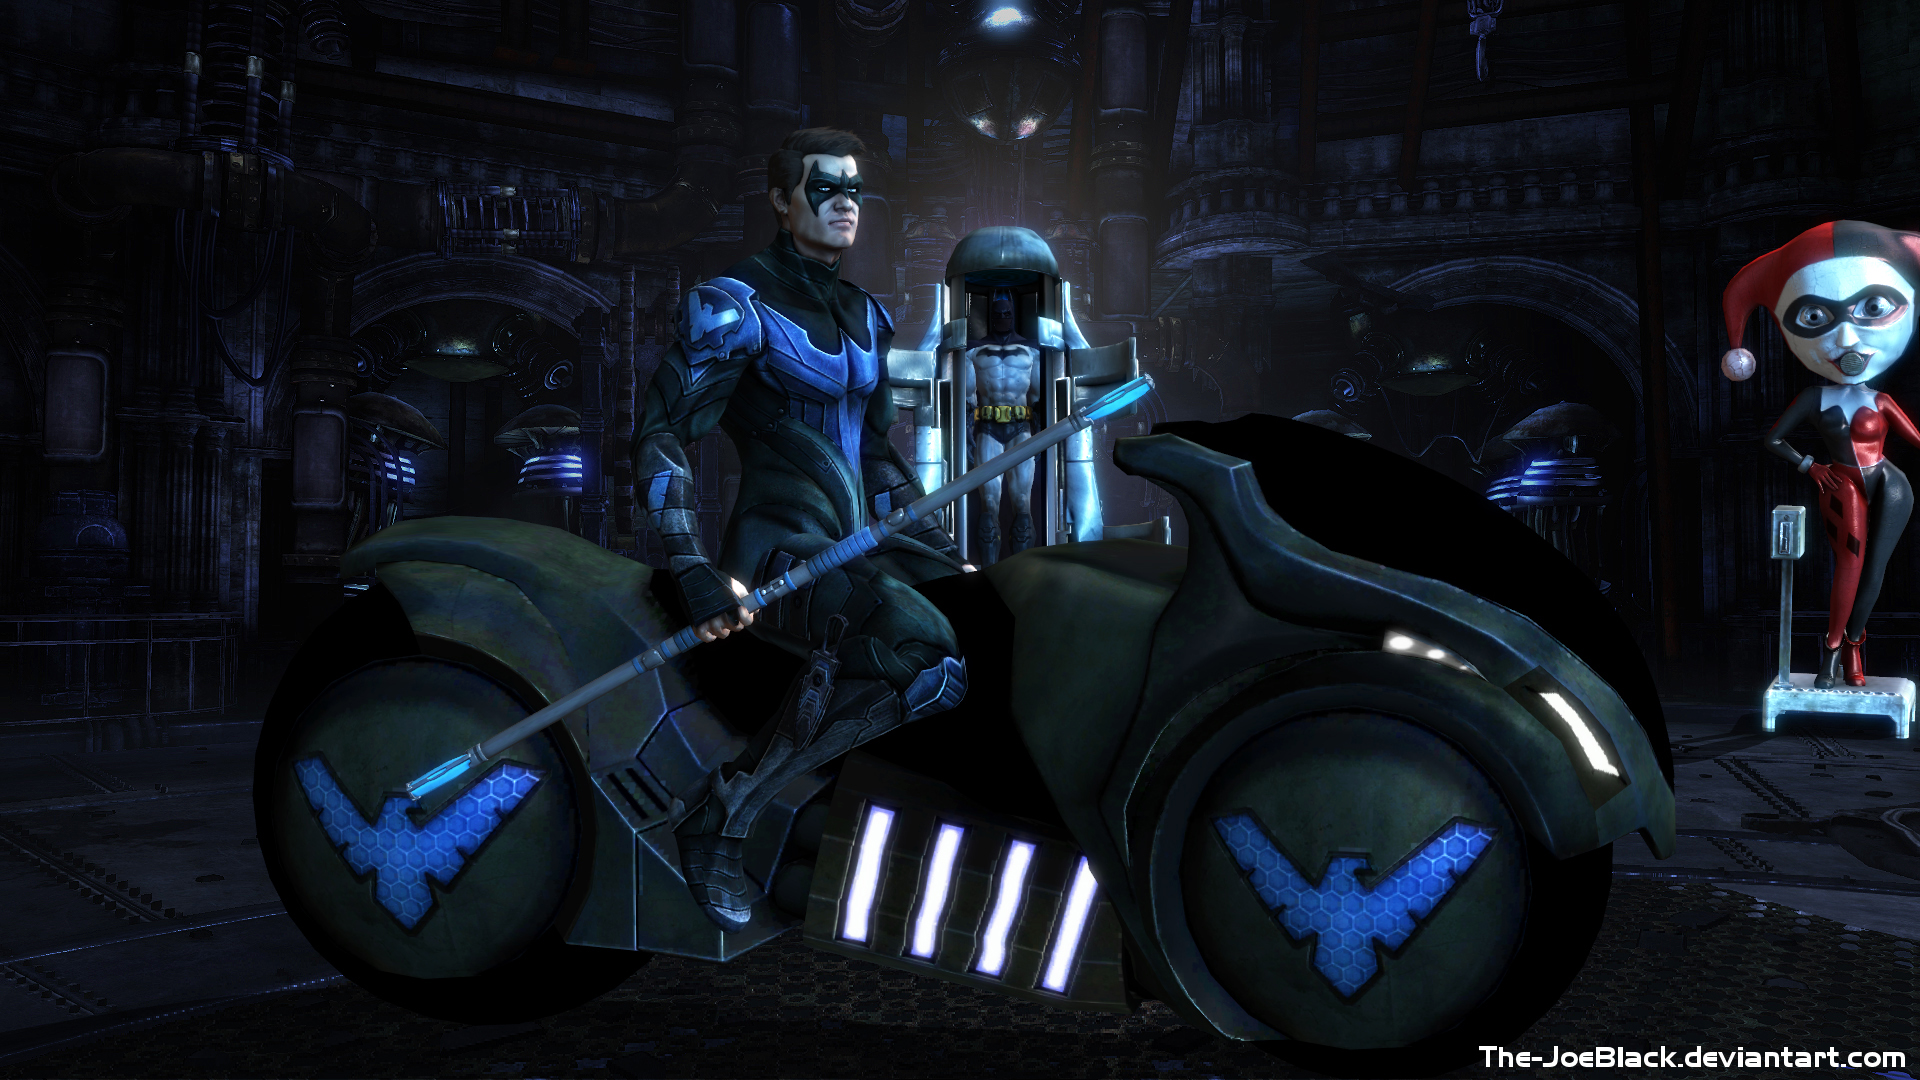 Injustice Nightwing wallpaper by The JoeBlack 1920x1080